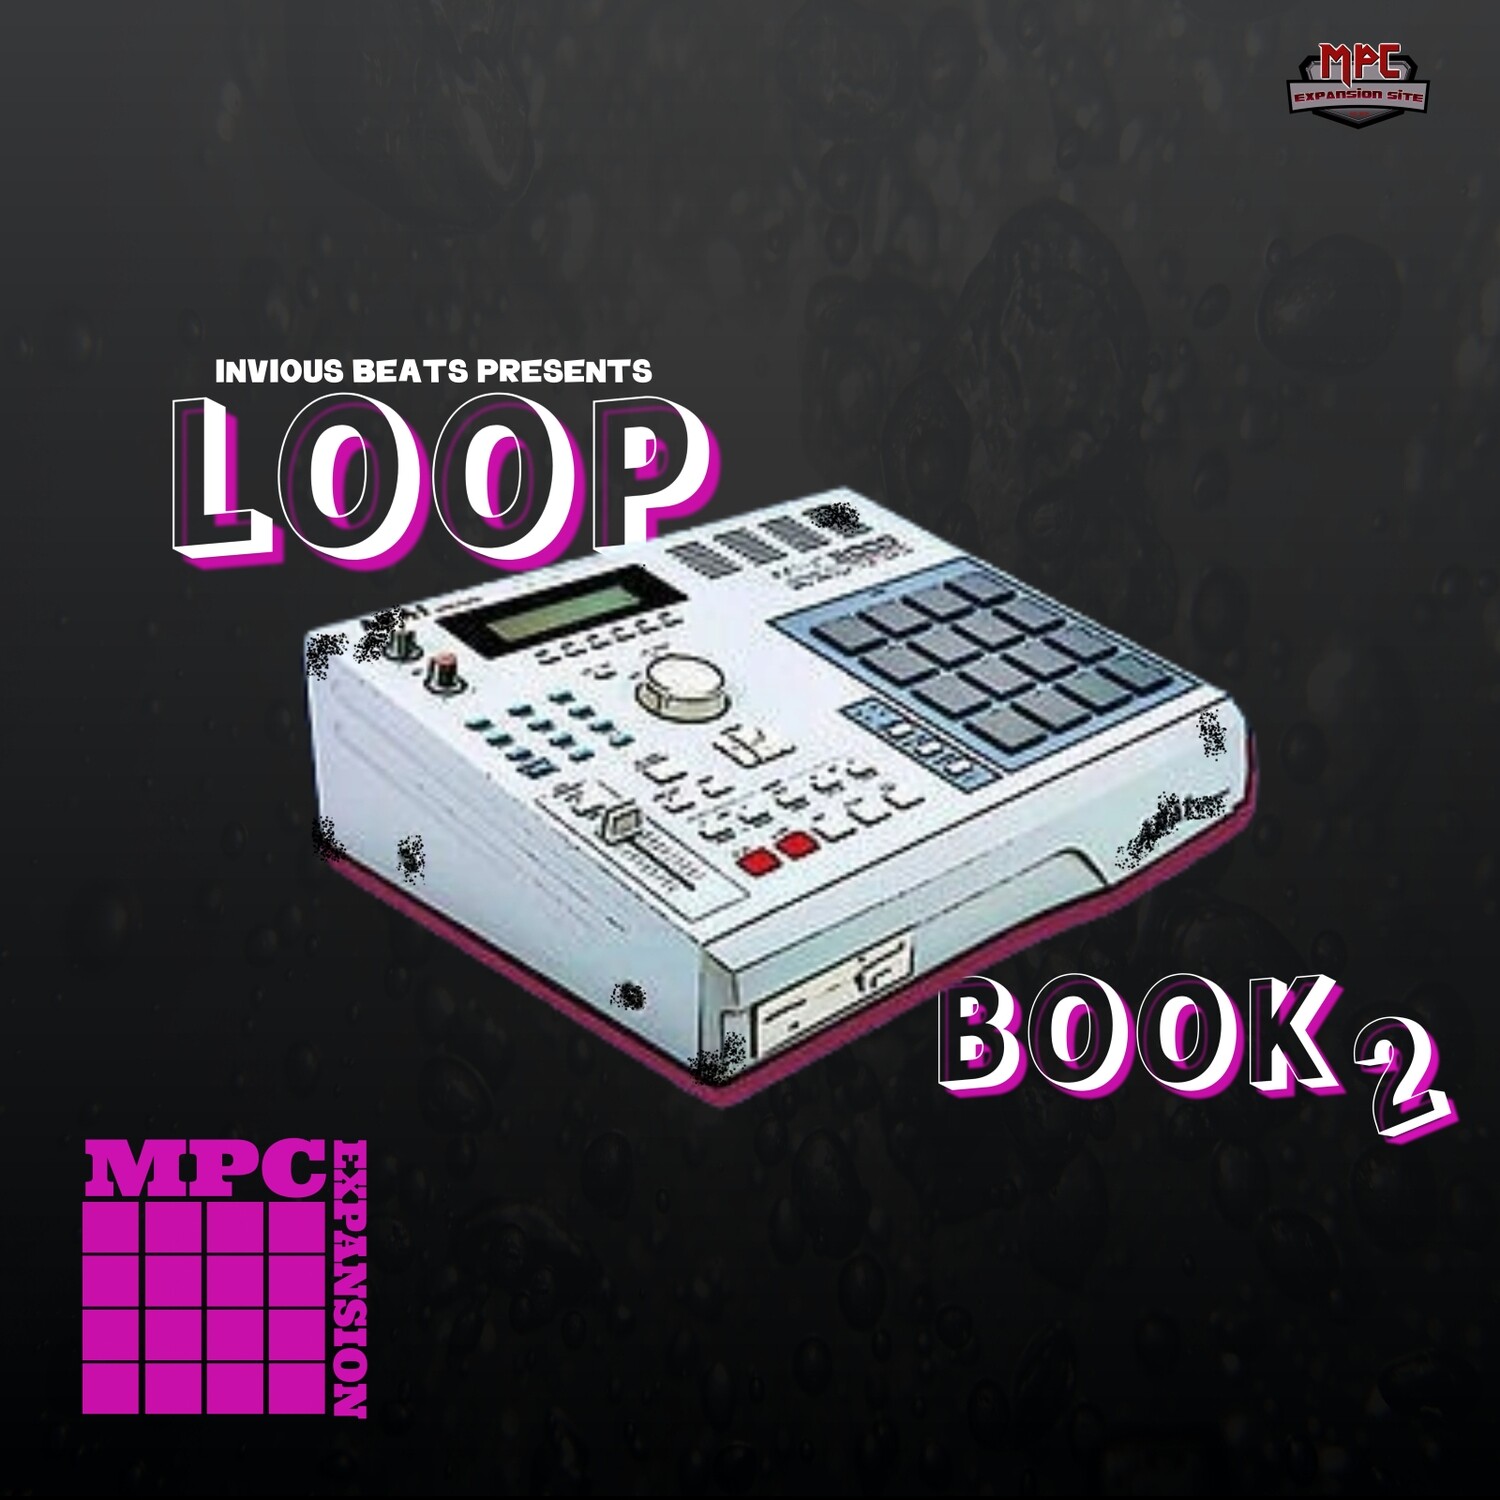 MPC EXPANSION 'LOOP BOOK 2' by INVIOUS